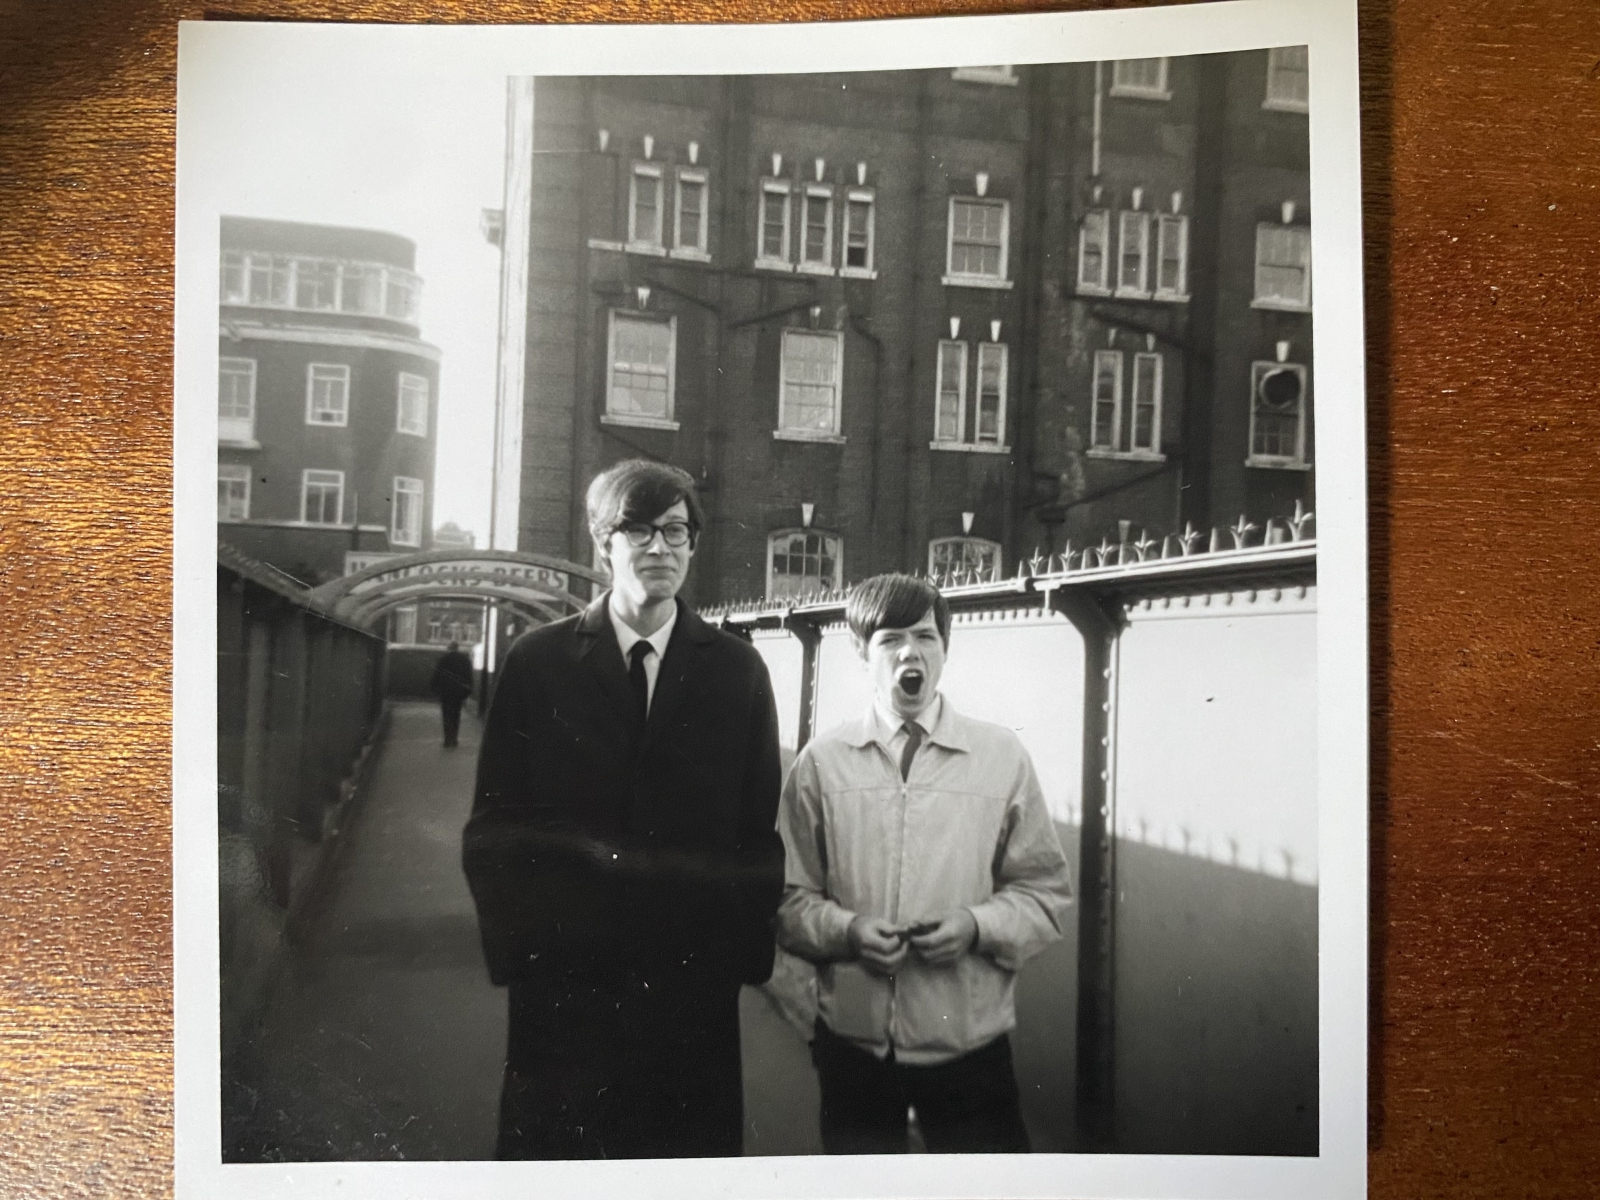 15 Aug 1968, Newport Gwent: Geoff Haigh and David Bray (Croesyceiliog Grammar School) on the way to the BCF Junior Championships at Wills Memorial Hall Bristol. Both became Gwent Champions and internationals.